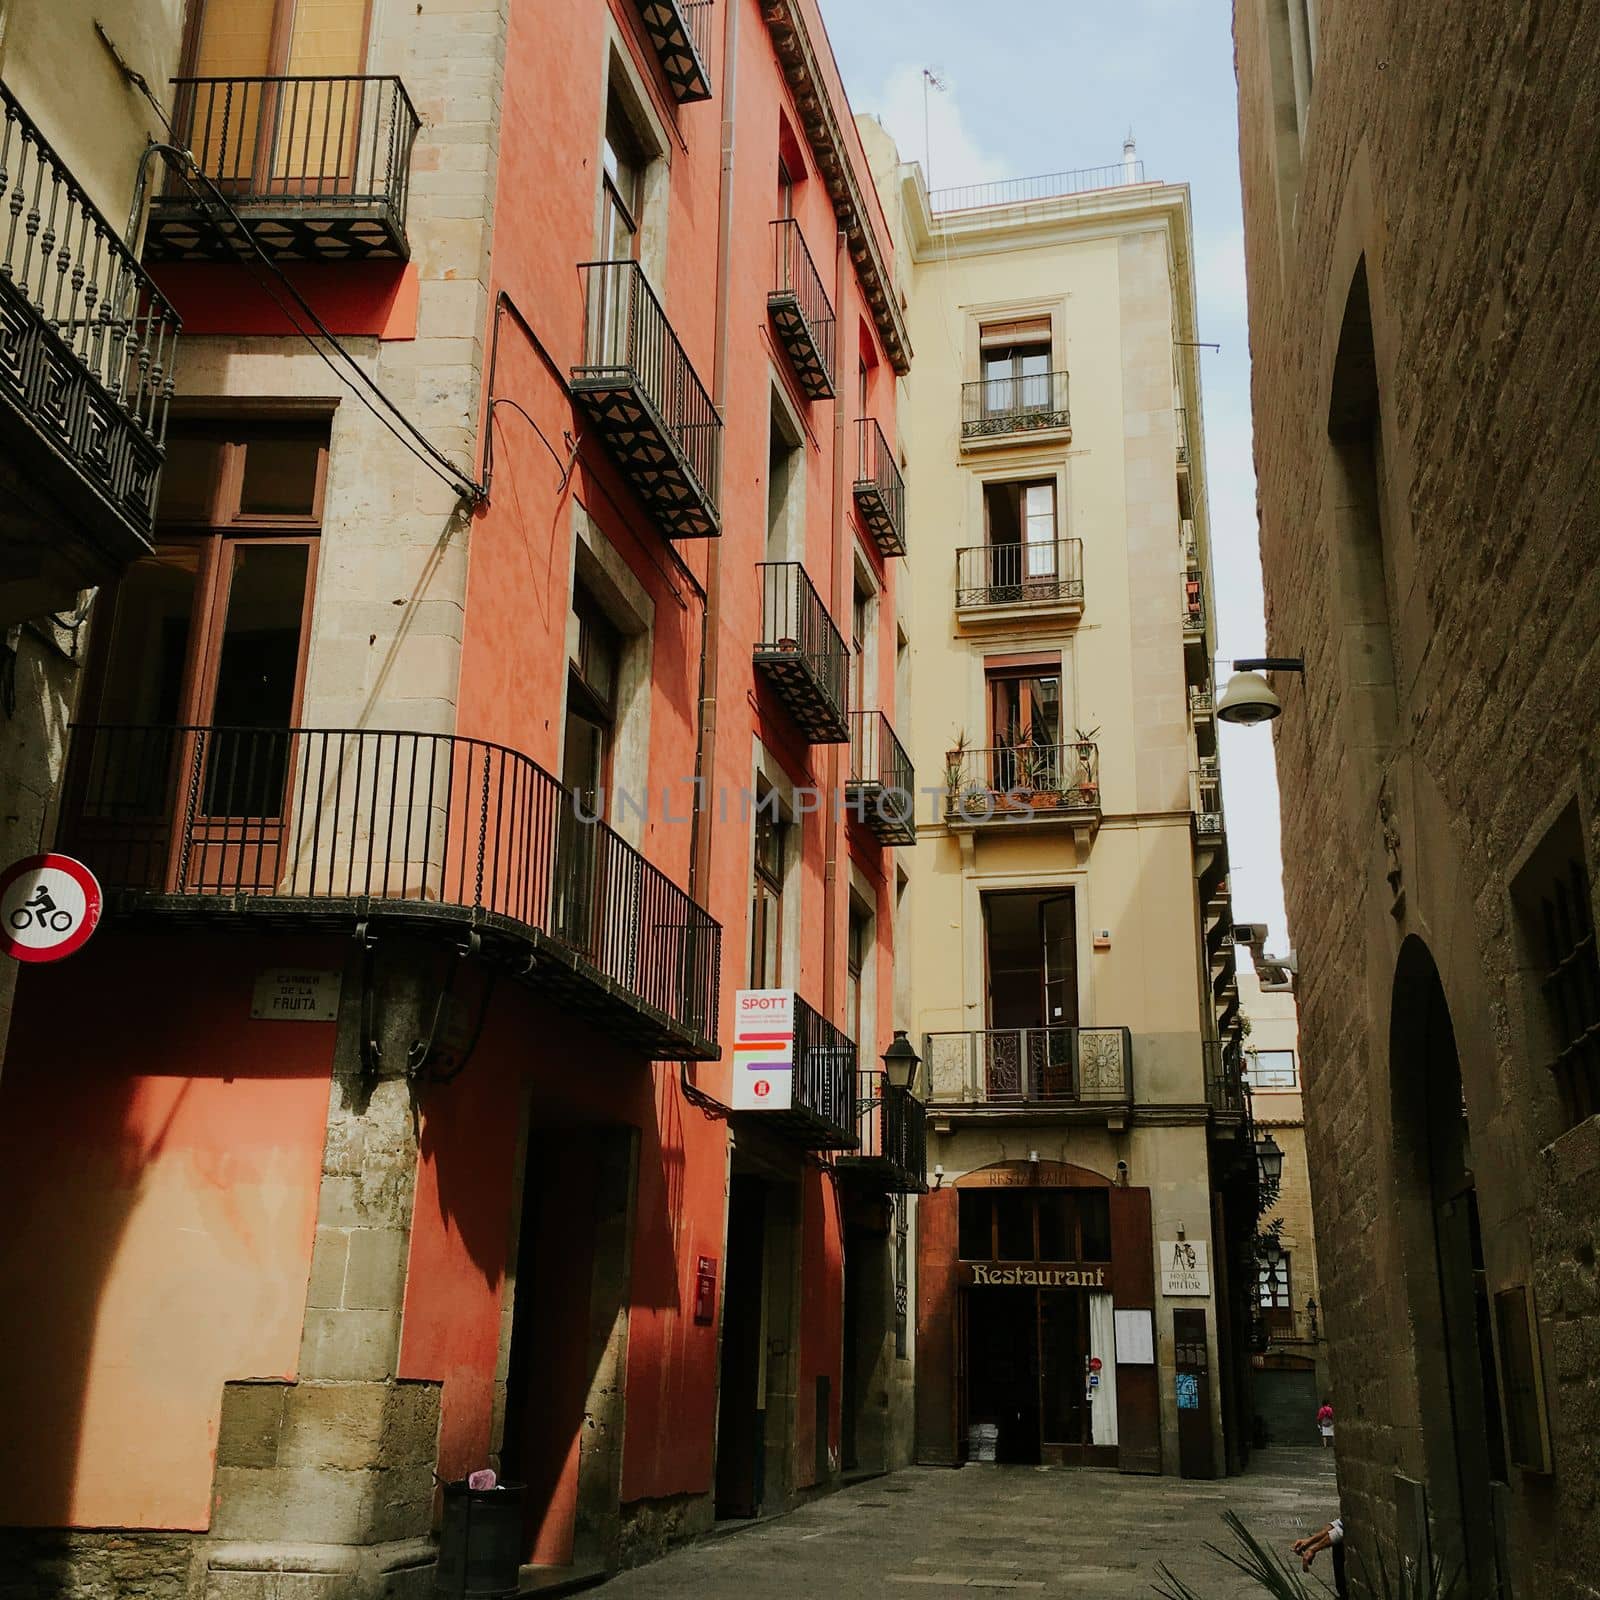 City street architecture in barcelona spain in summer. High quality photo